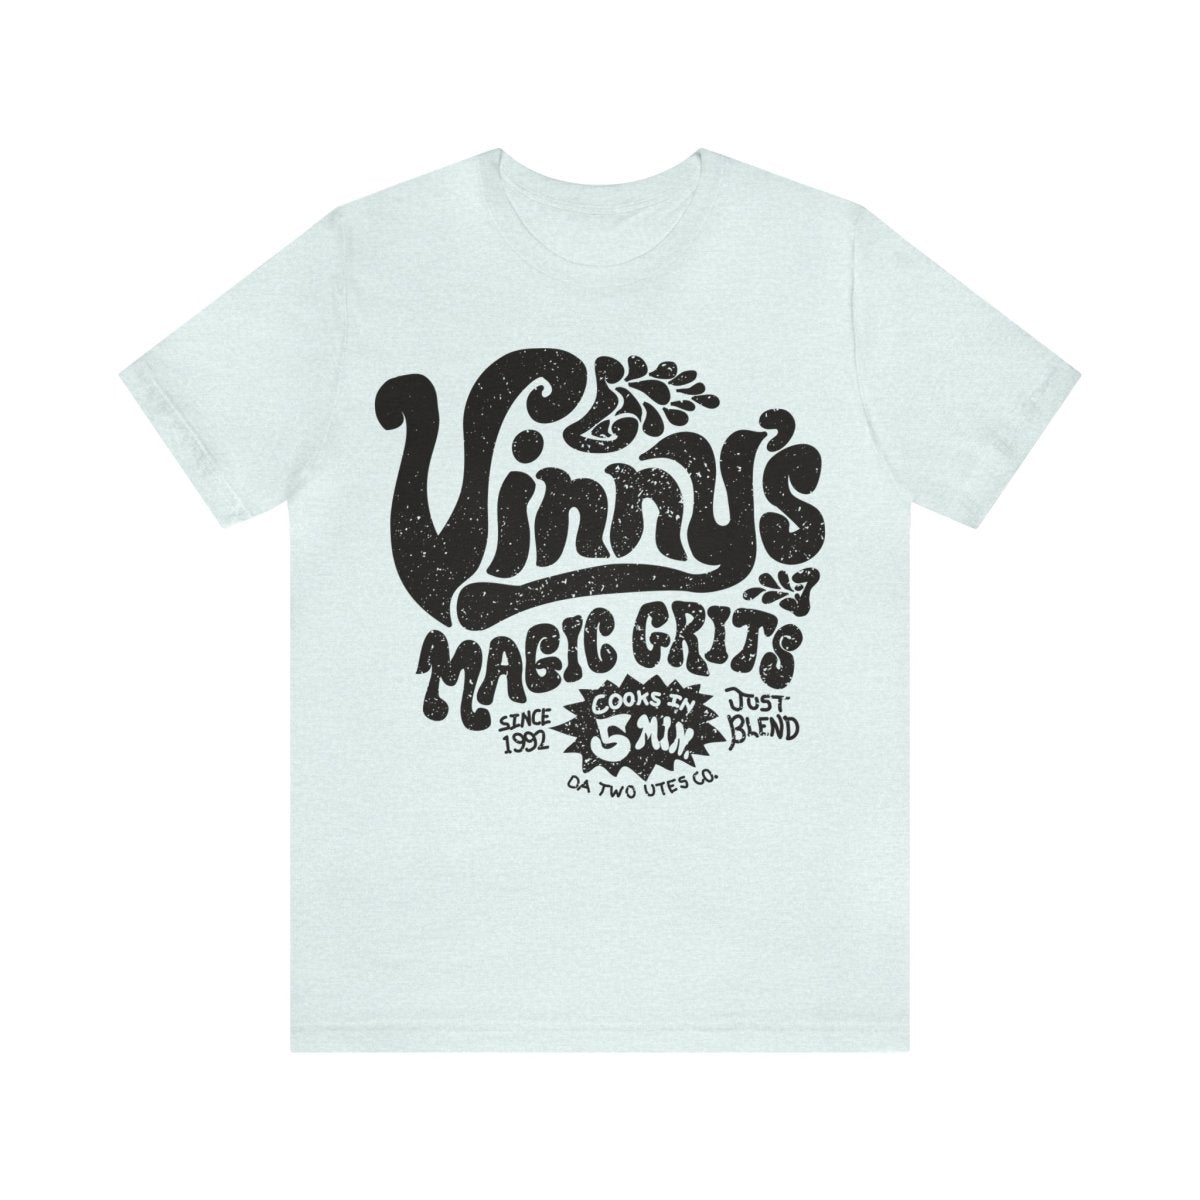 Vinny's Magic Grits Premium T-Shirt, Cooks in 5 Minutes, Grit Eating World Favorite, Just Blend